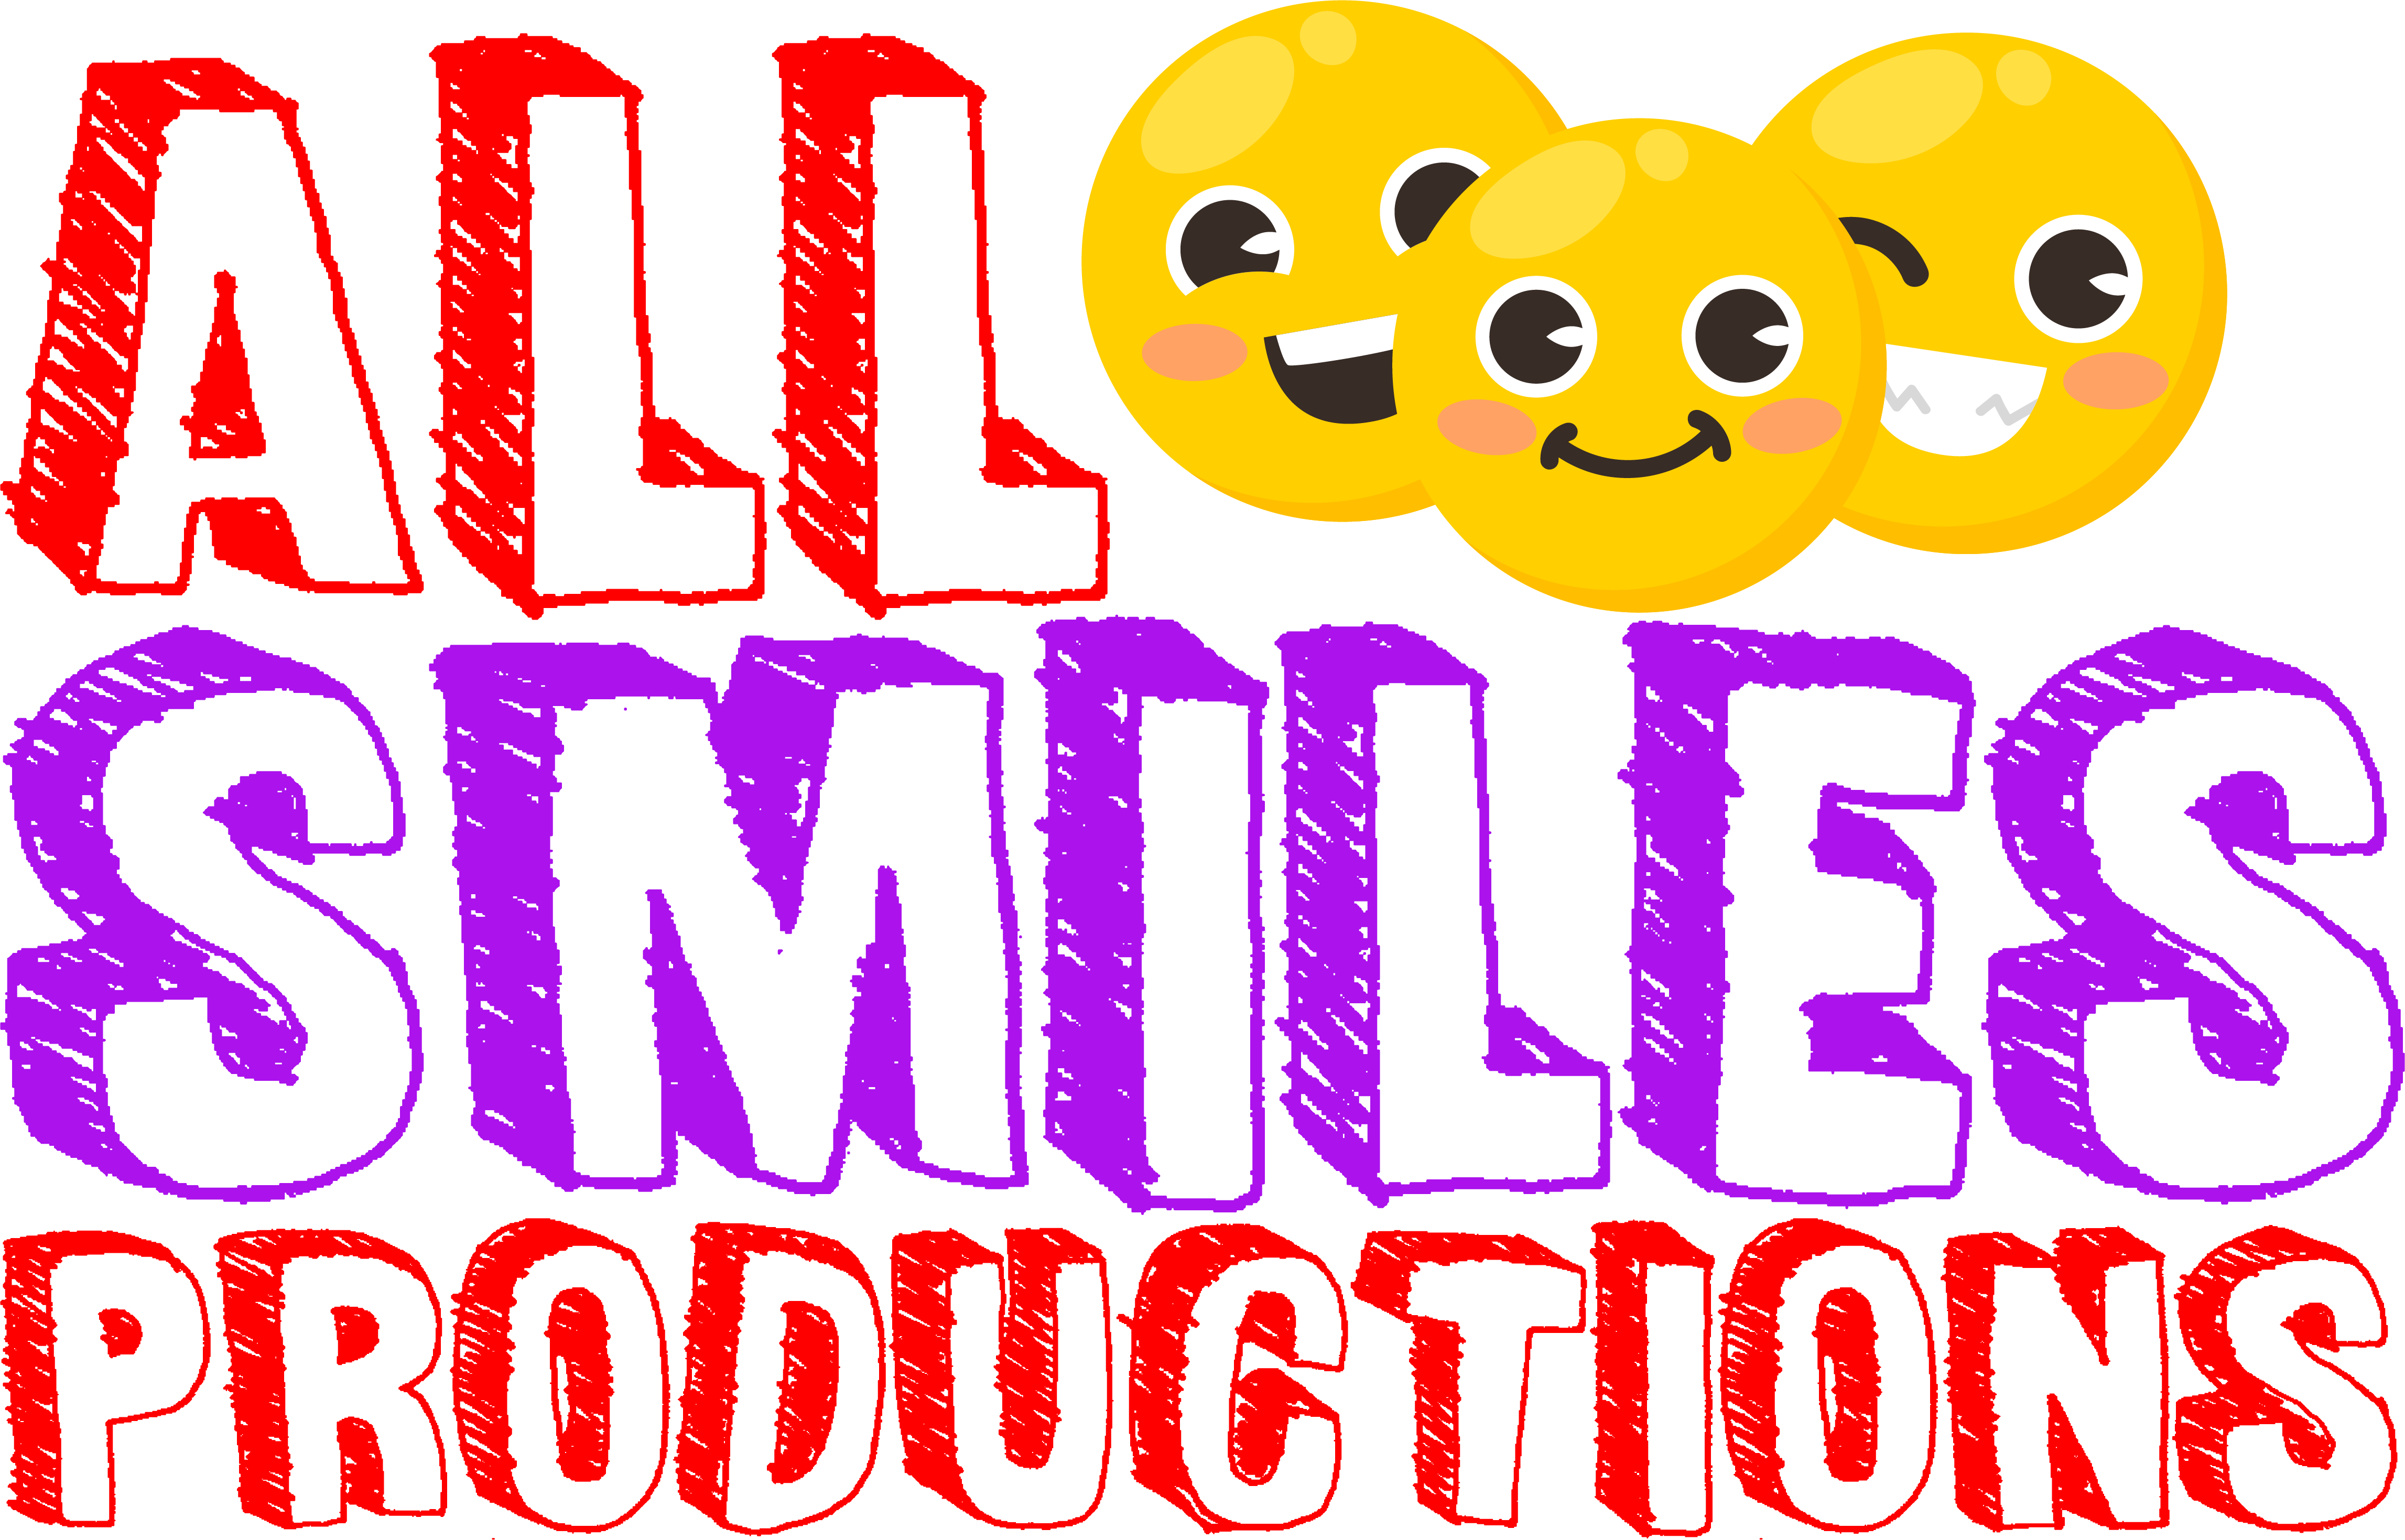 All Smile Productions, LLC.